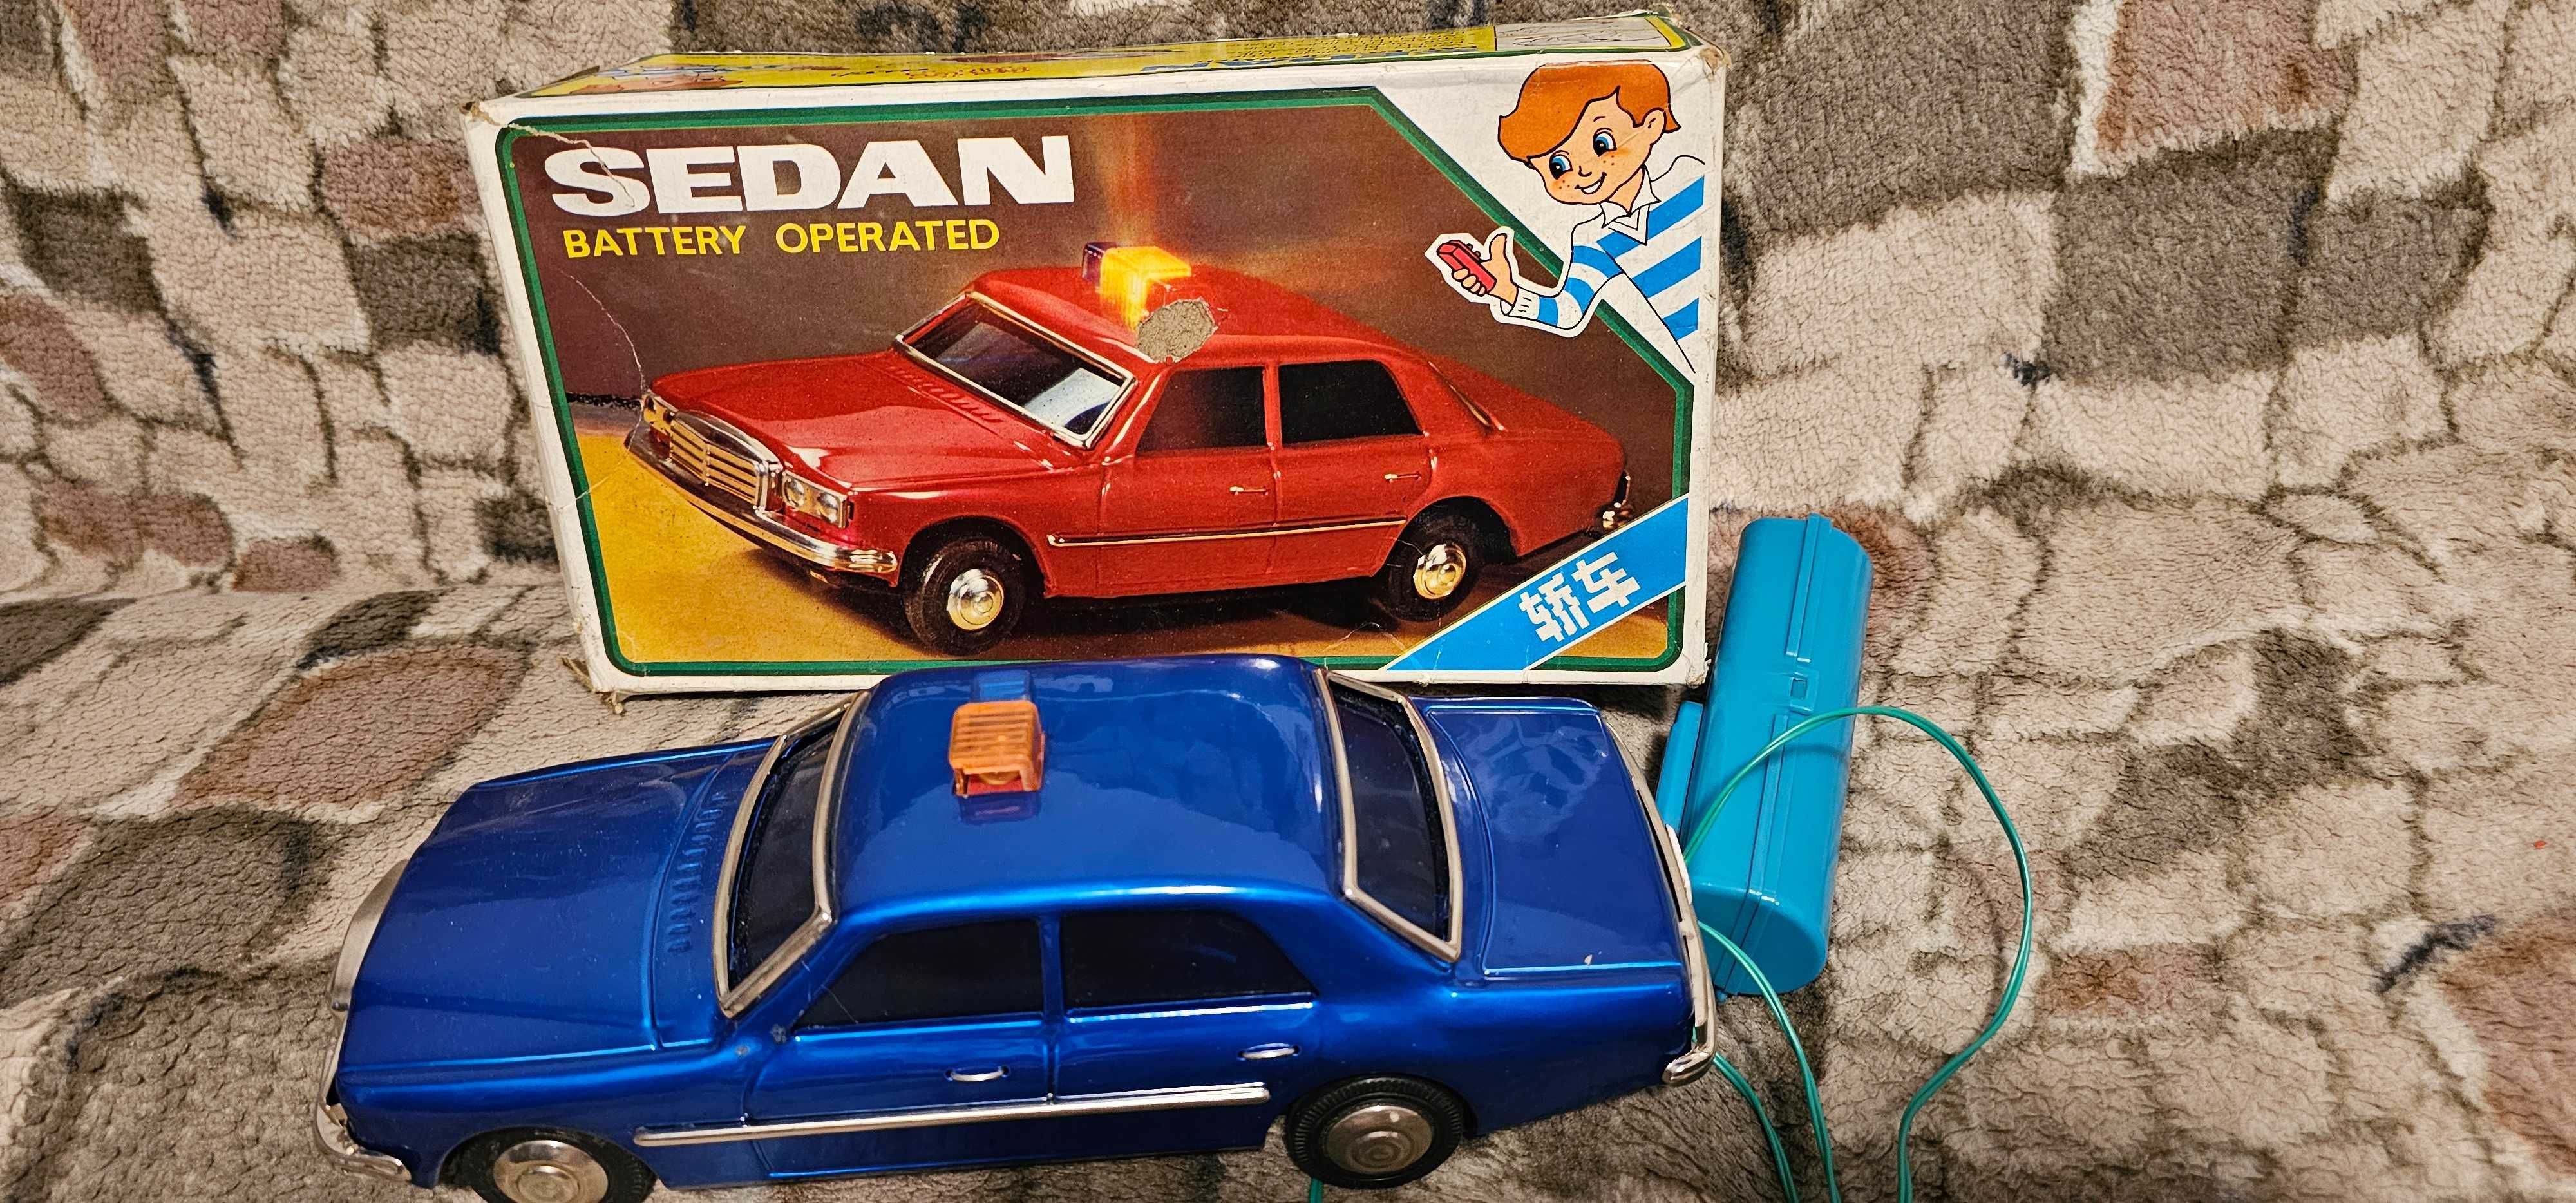 Vintage toy car: SEDAN, Battery Operated (Made in China)